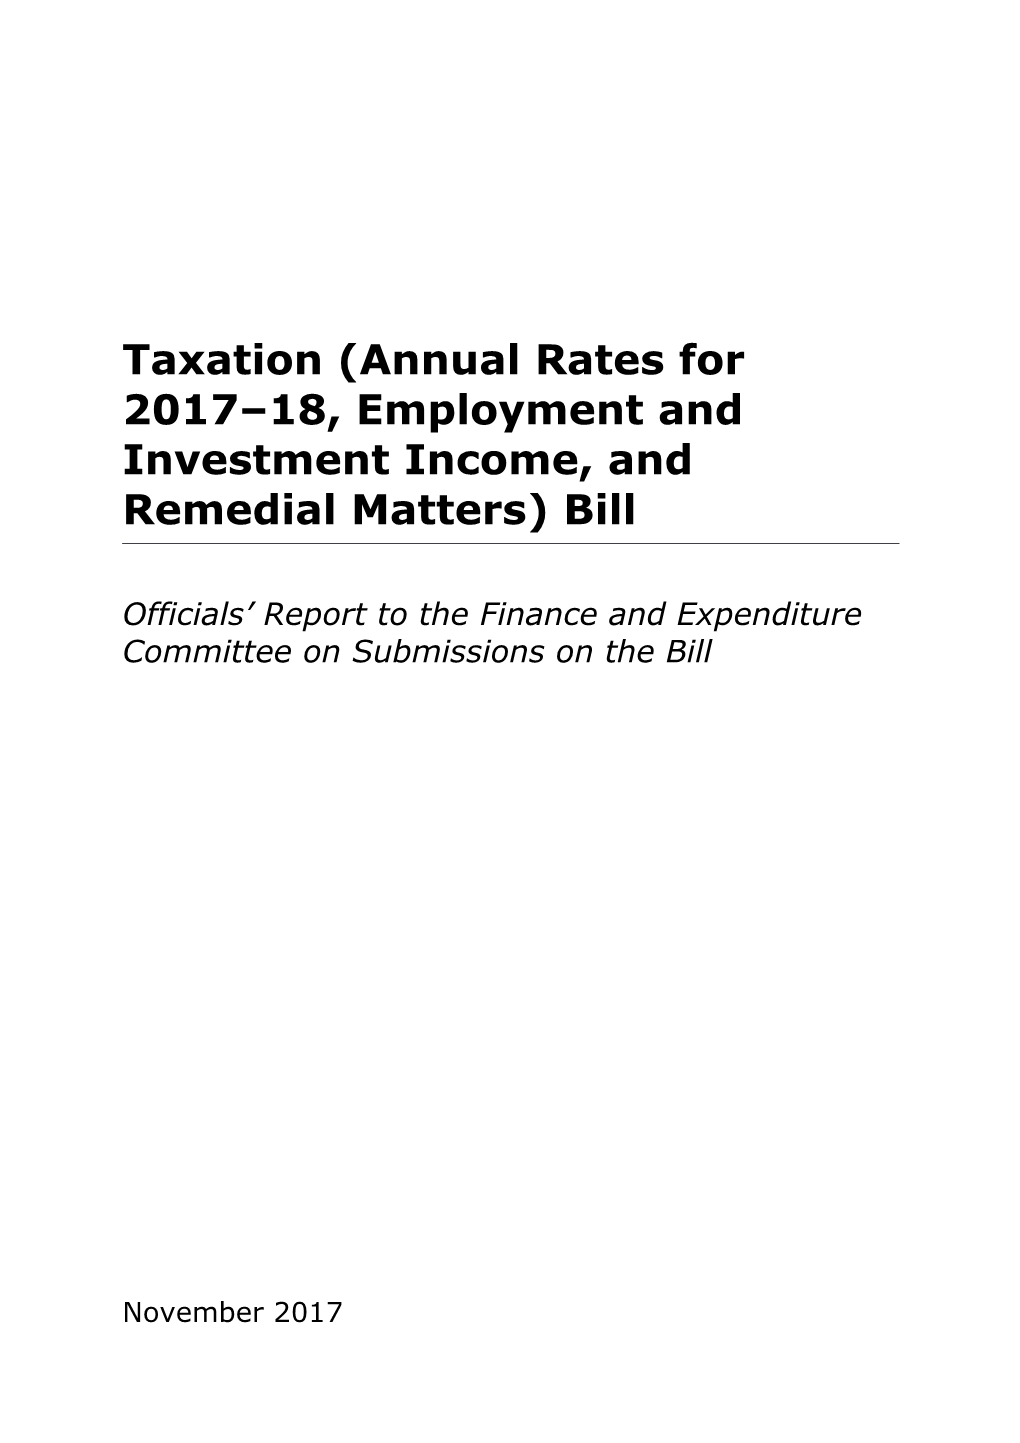 Taxation (Annual Rates for 2017 18, Employment and Investment Income, and Remedial Matters)